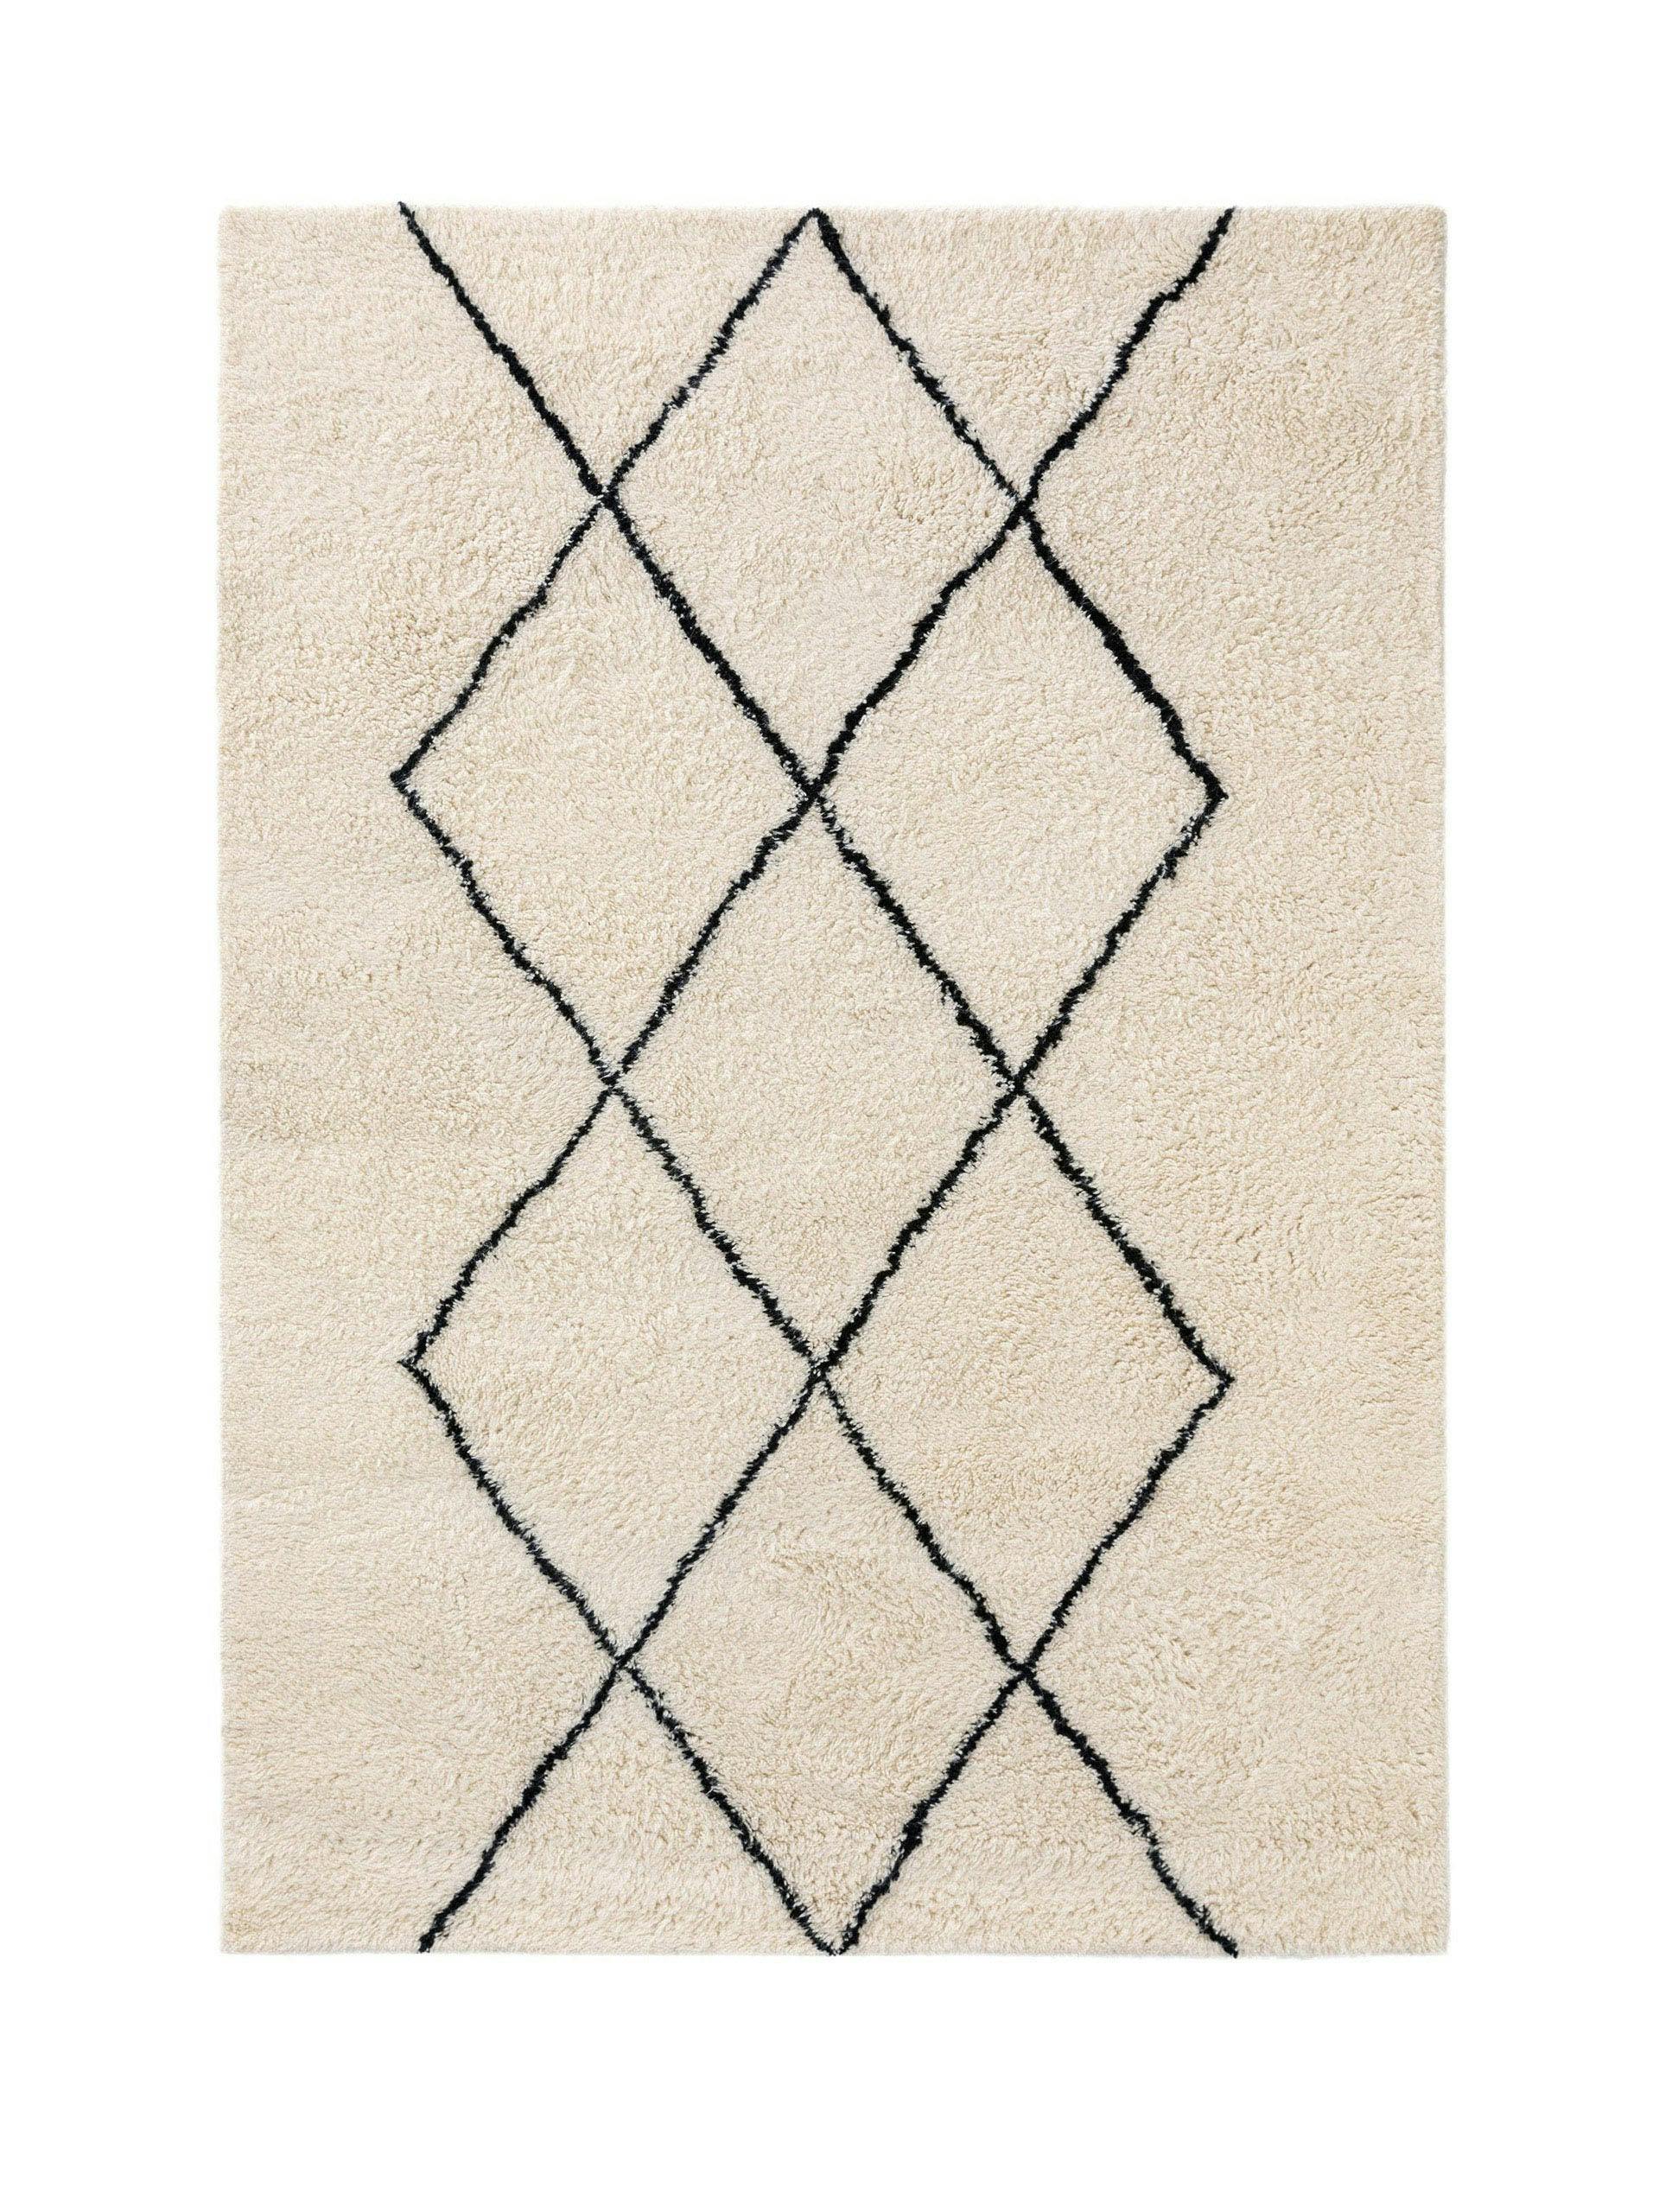 Wool rug with a diamond pattern